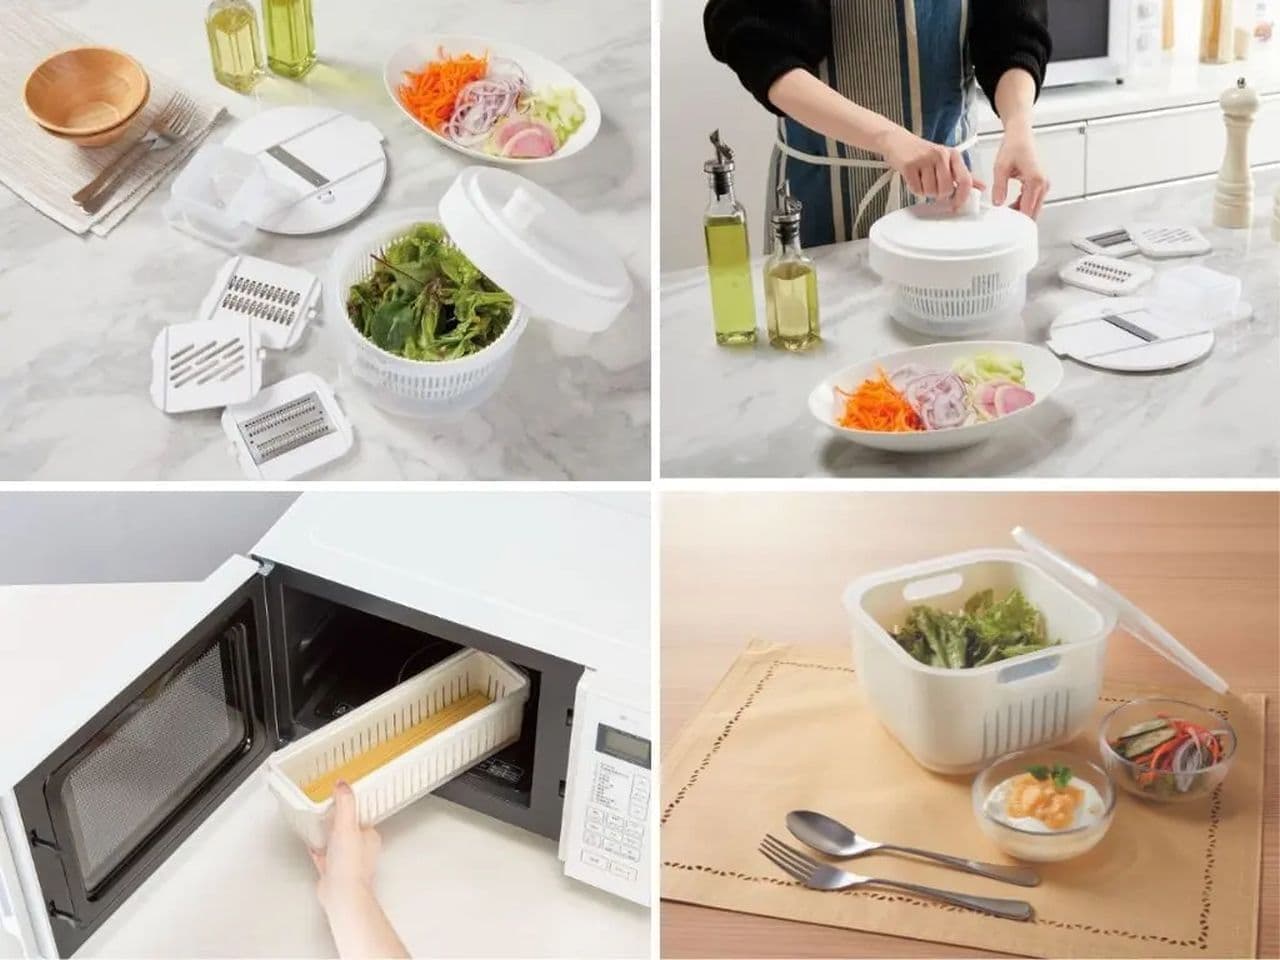 Nitori's "10-in-1 Compact Slicer Preservation Set"